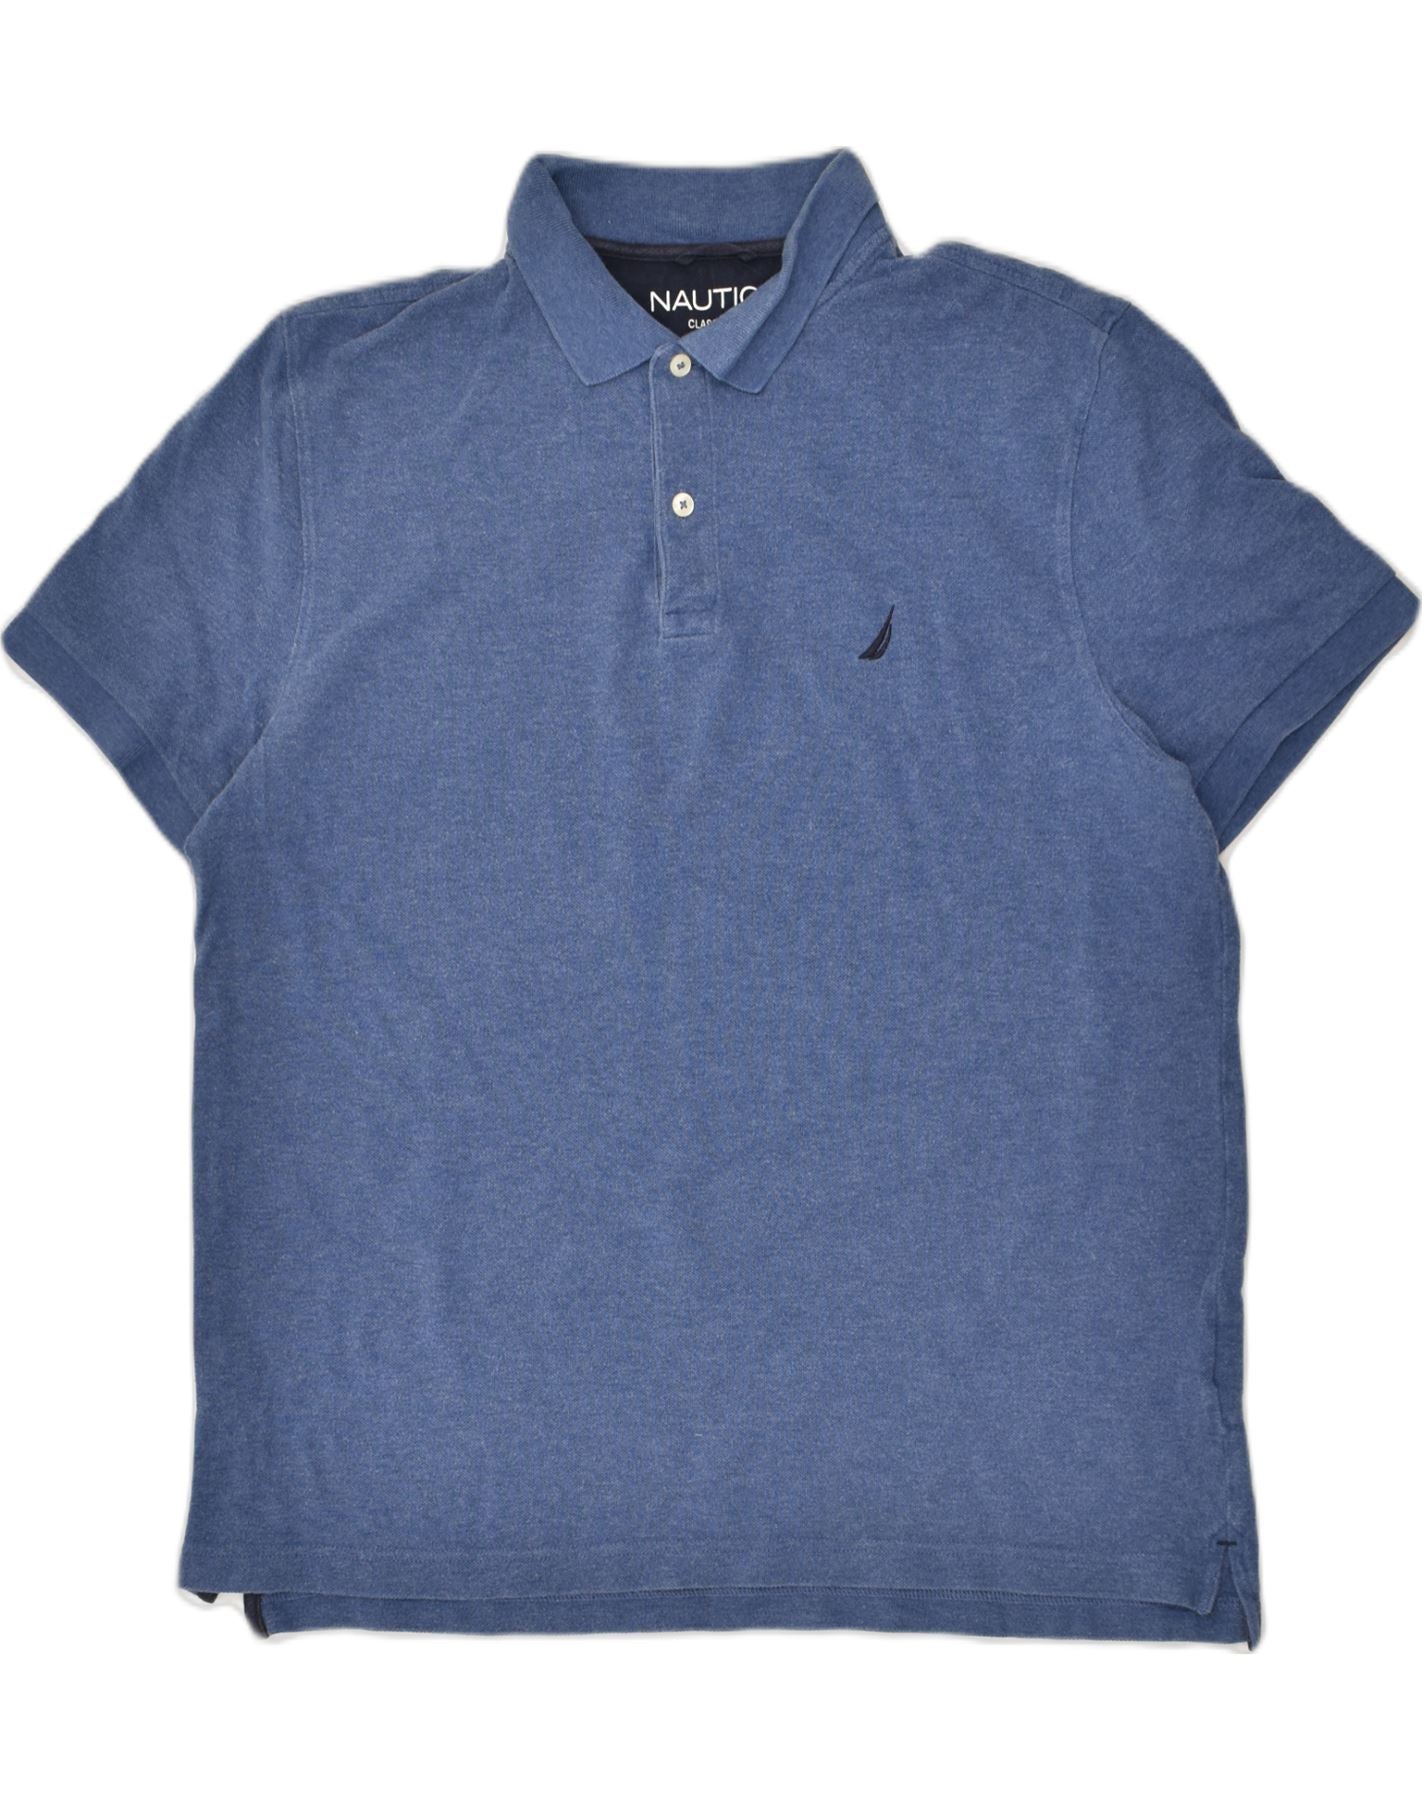 NAUTICA Mens Classic Fit Polo Shirt Large Navy Blue Cotton, Vintage &  Second-Hand Clothing Online